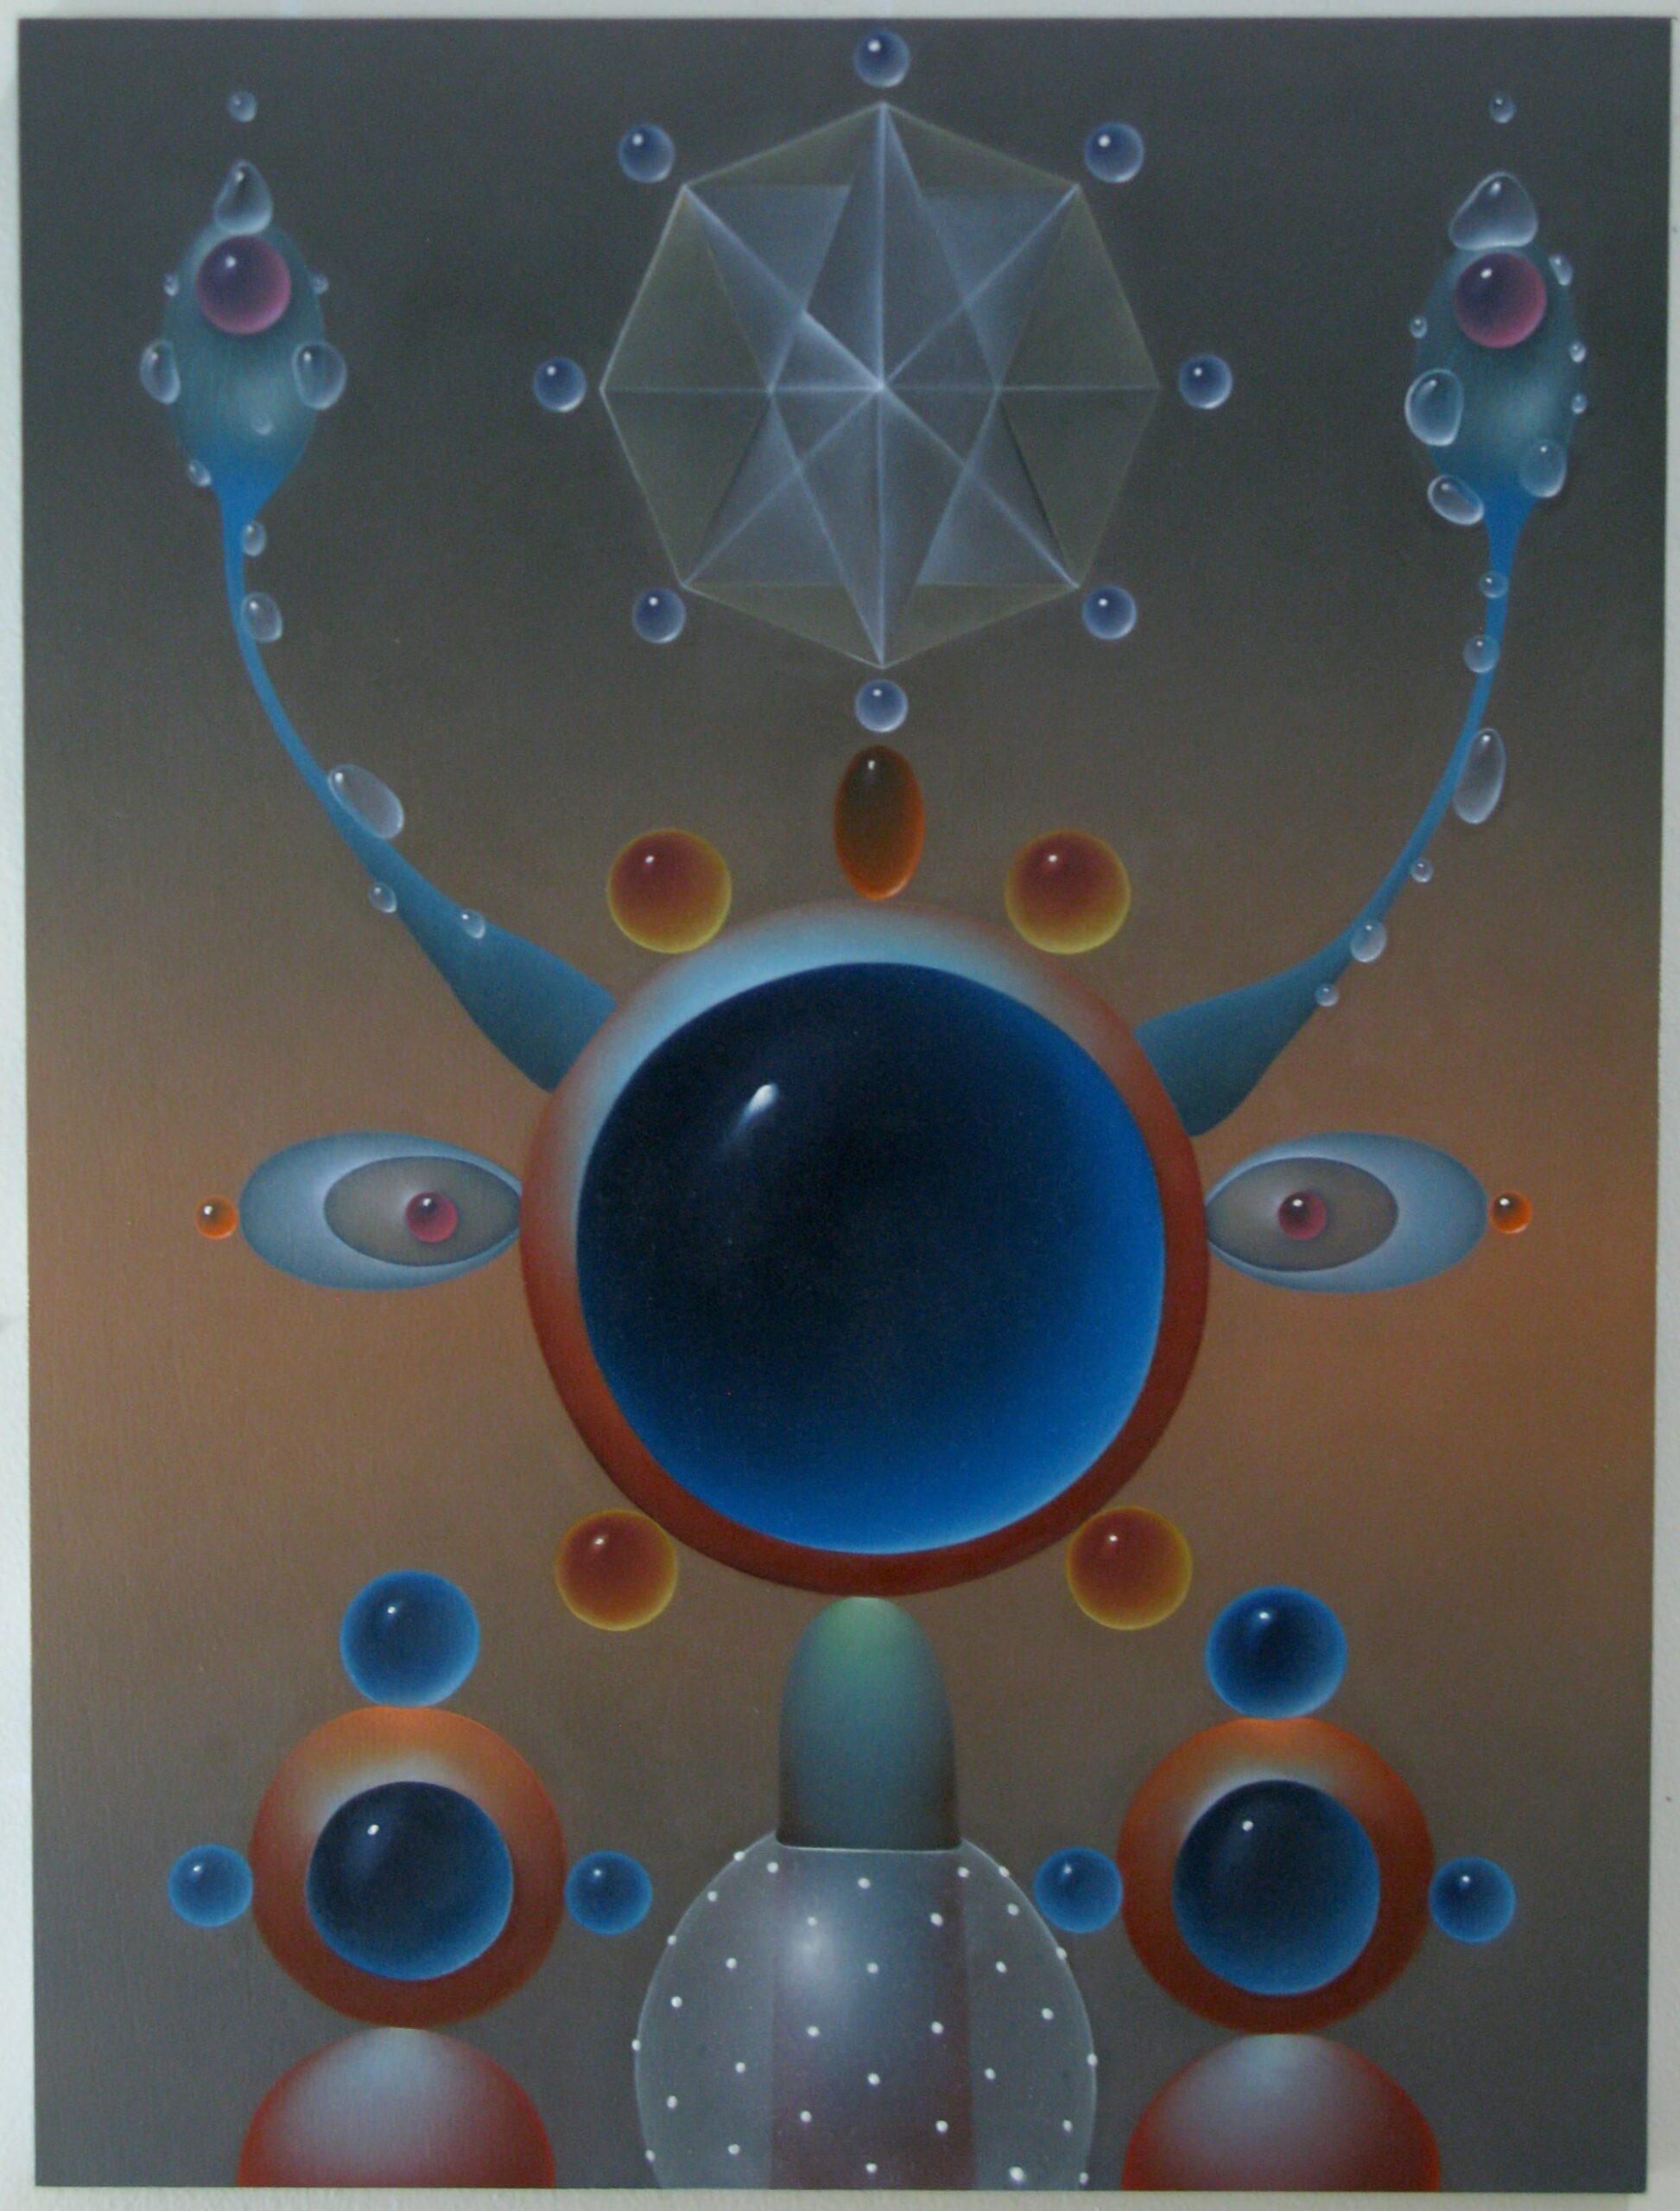 a symmetric work with orbs and geometric shapes that appear like eyes